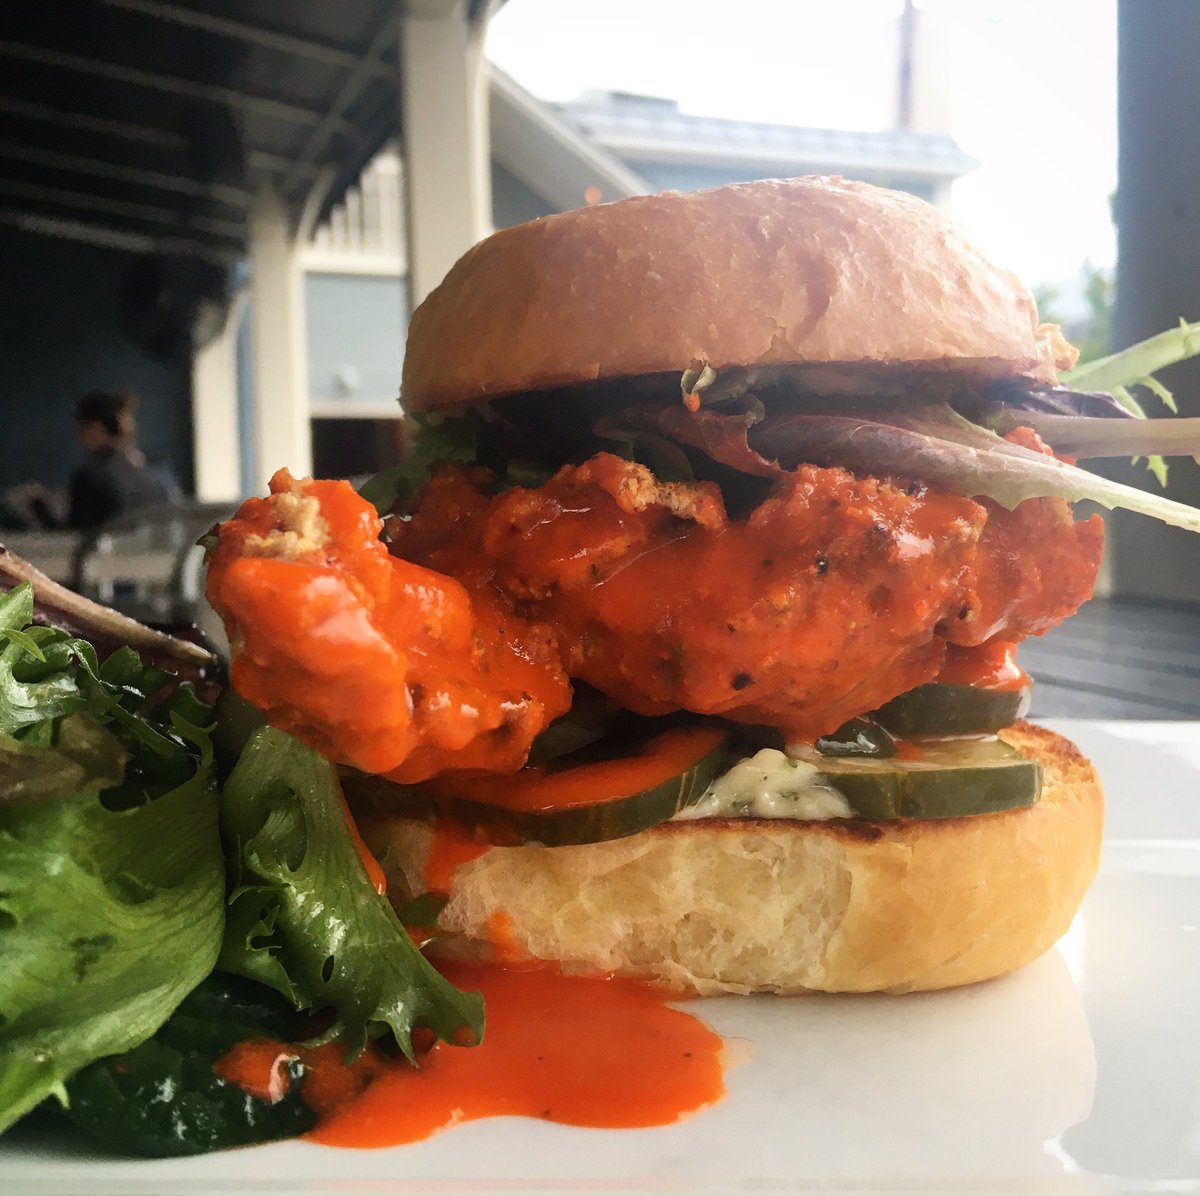 Our hot chicken sandwich is definitely a crowd pleaser! Cool it down with an extra side of our cilantro ranch dressing! 🔥🍗 #rva #rvadine #rvachickensandwich #postbellumrva #hotchicken